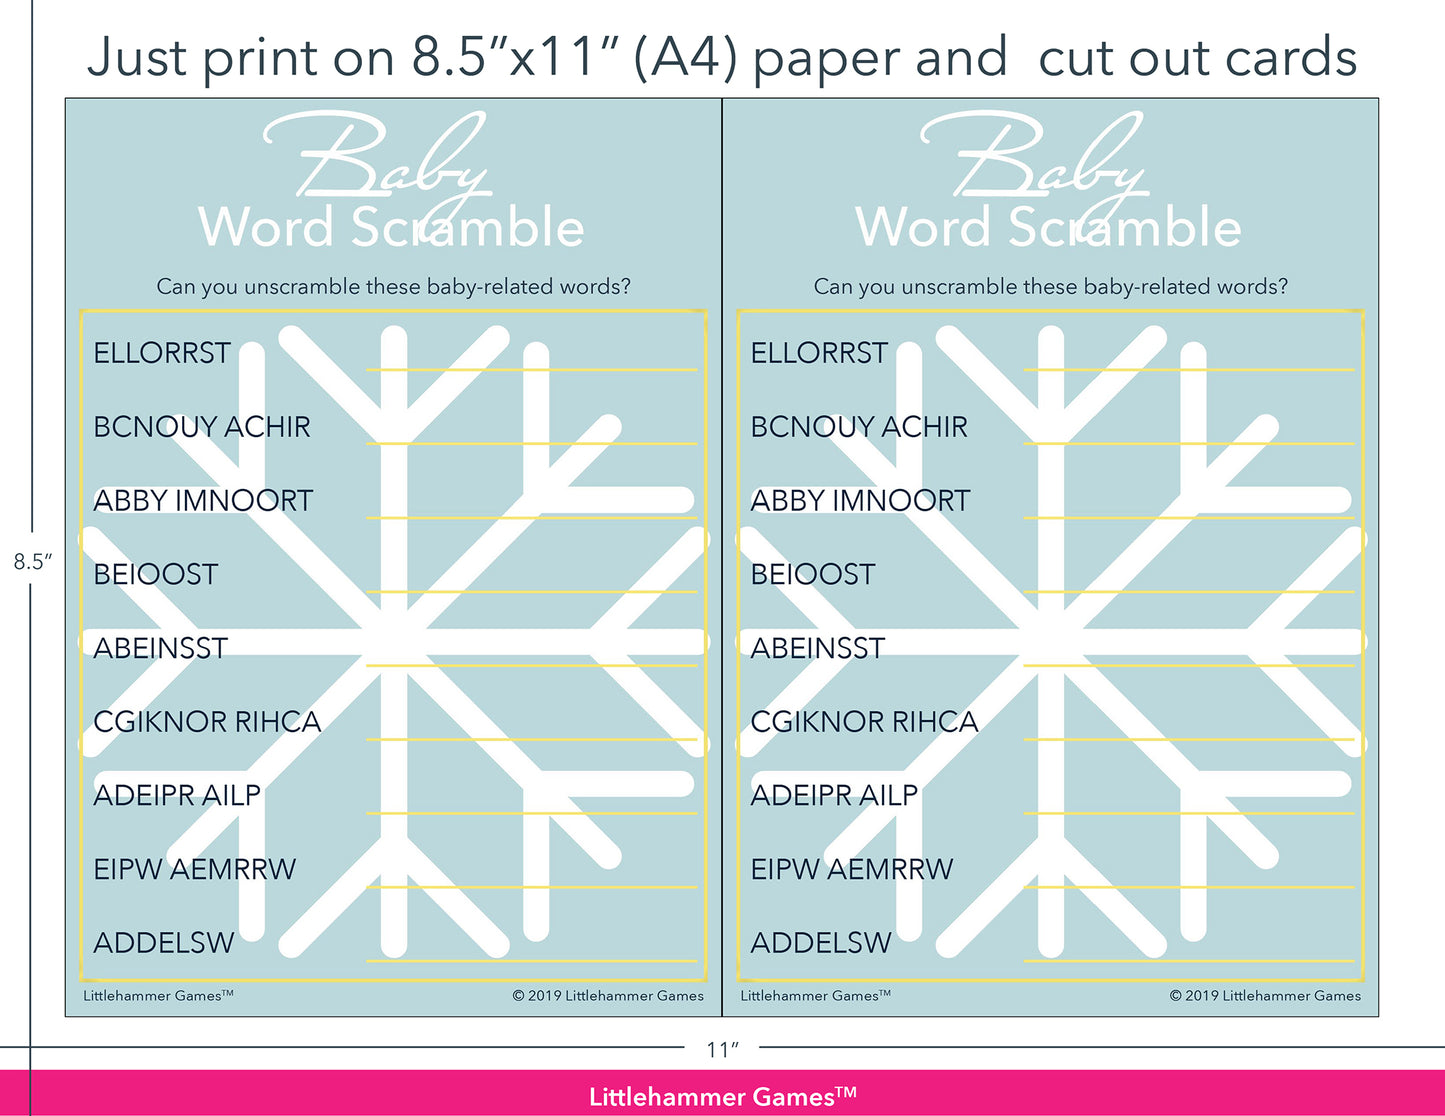 Baby Word Scramble snowflake game cards with printing instructions